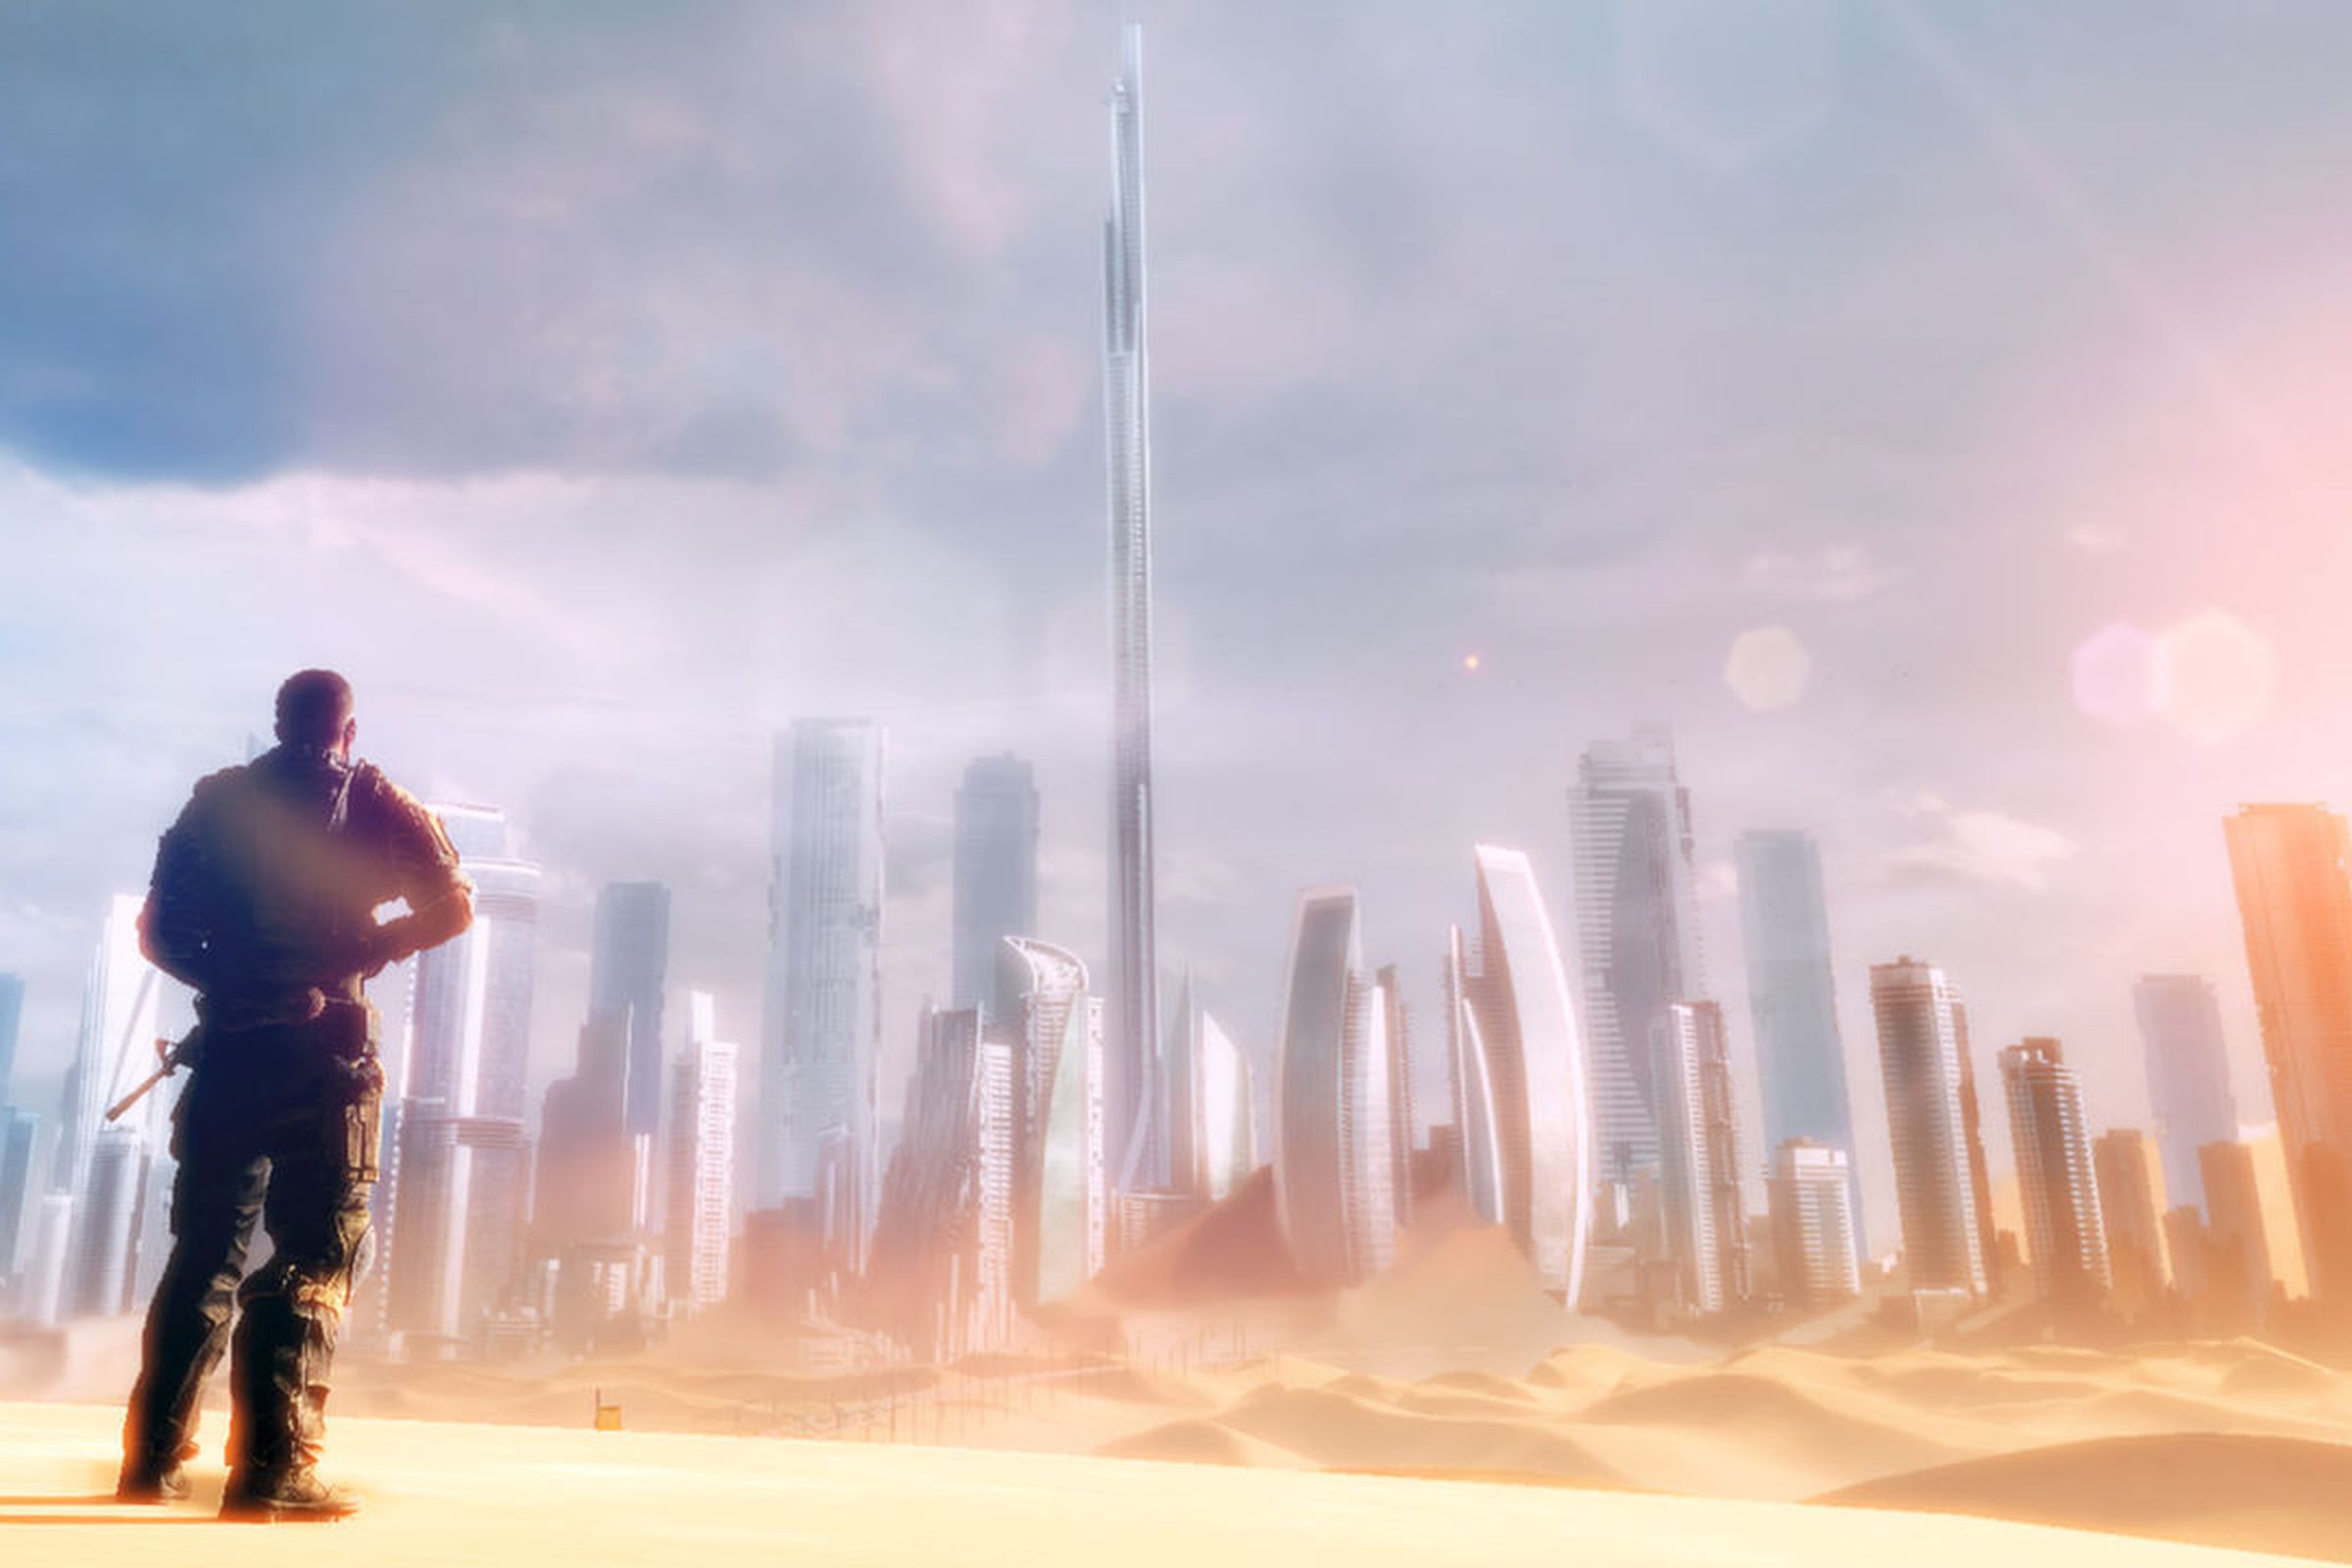 Screenshot from Spec Ops: The Line featuring the game’s protagonist in tactical gear wielding a rifle staring at a urban city covered by sand.